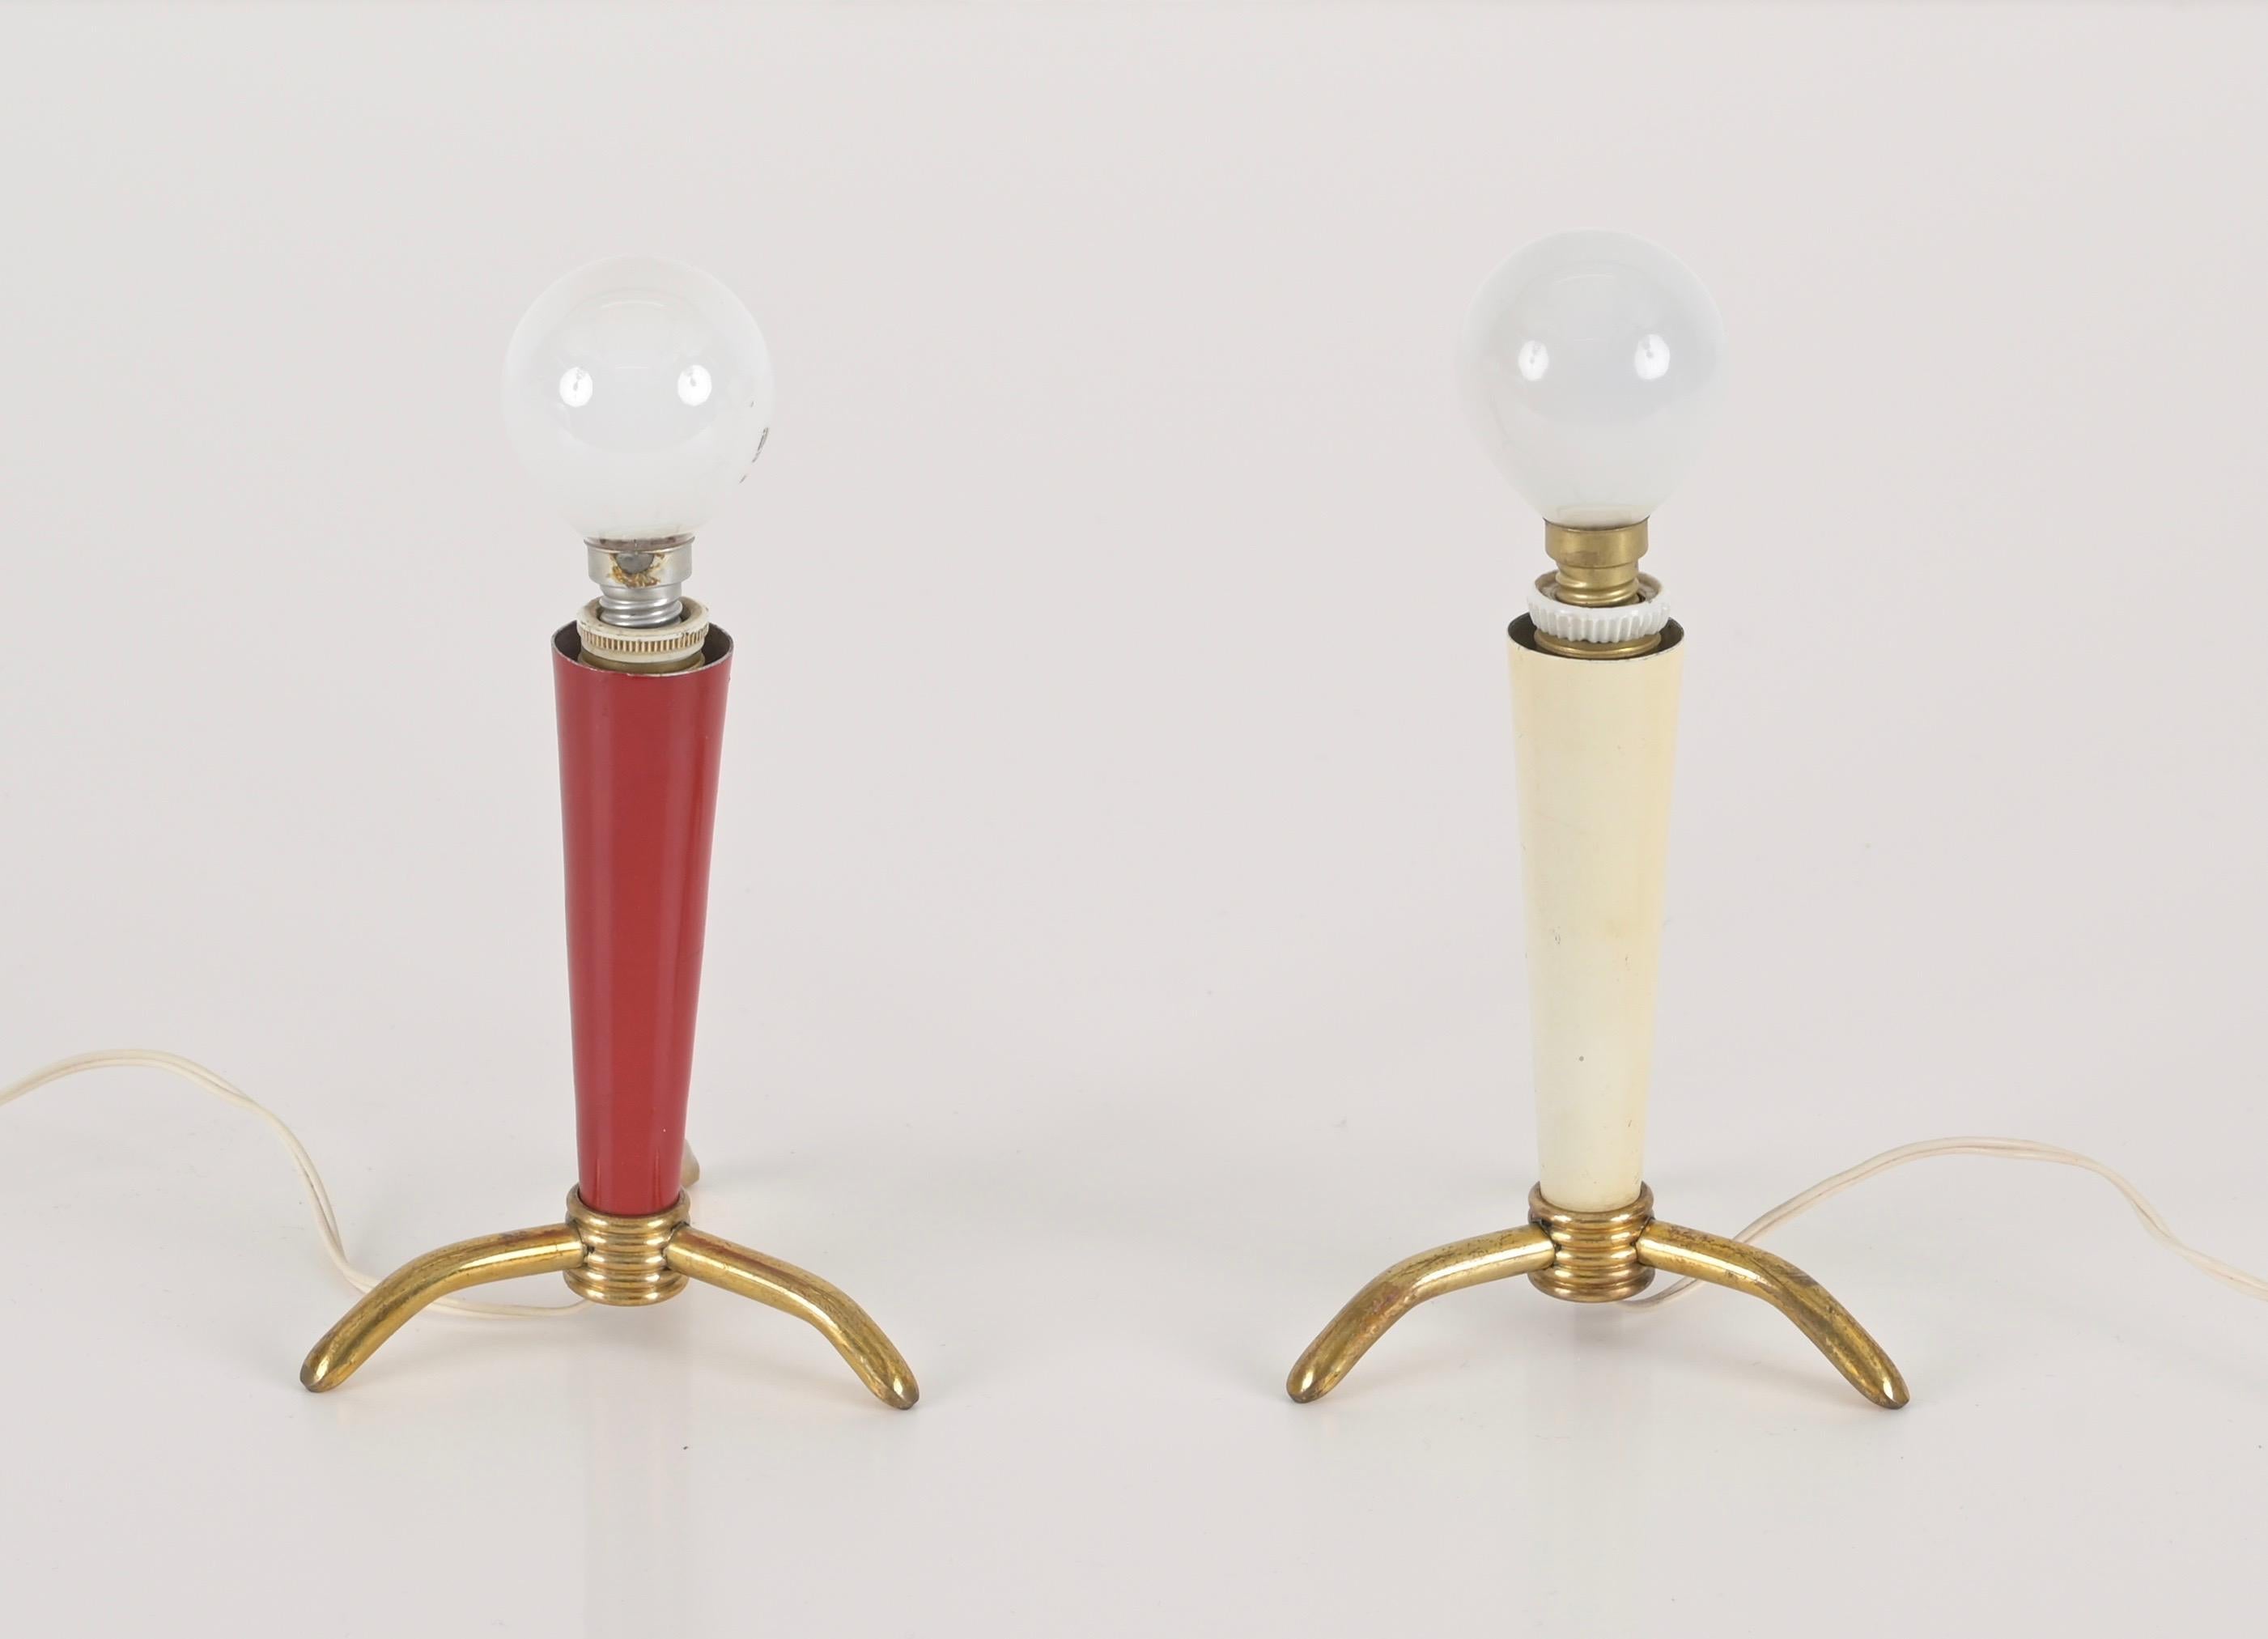 Pairs of Italian Table Lamps in Brass, Red and Ivory Metal, Stilnovo, 1950s For Sale 5